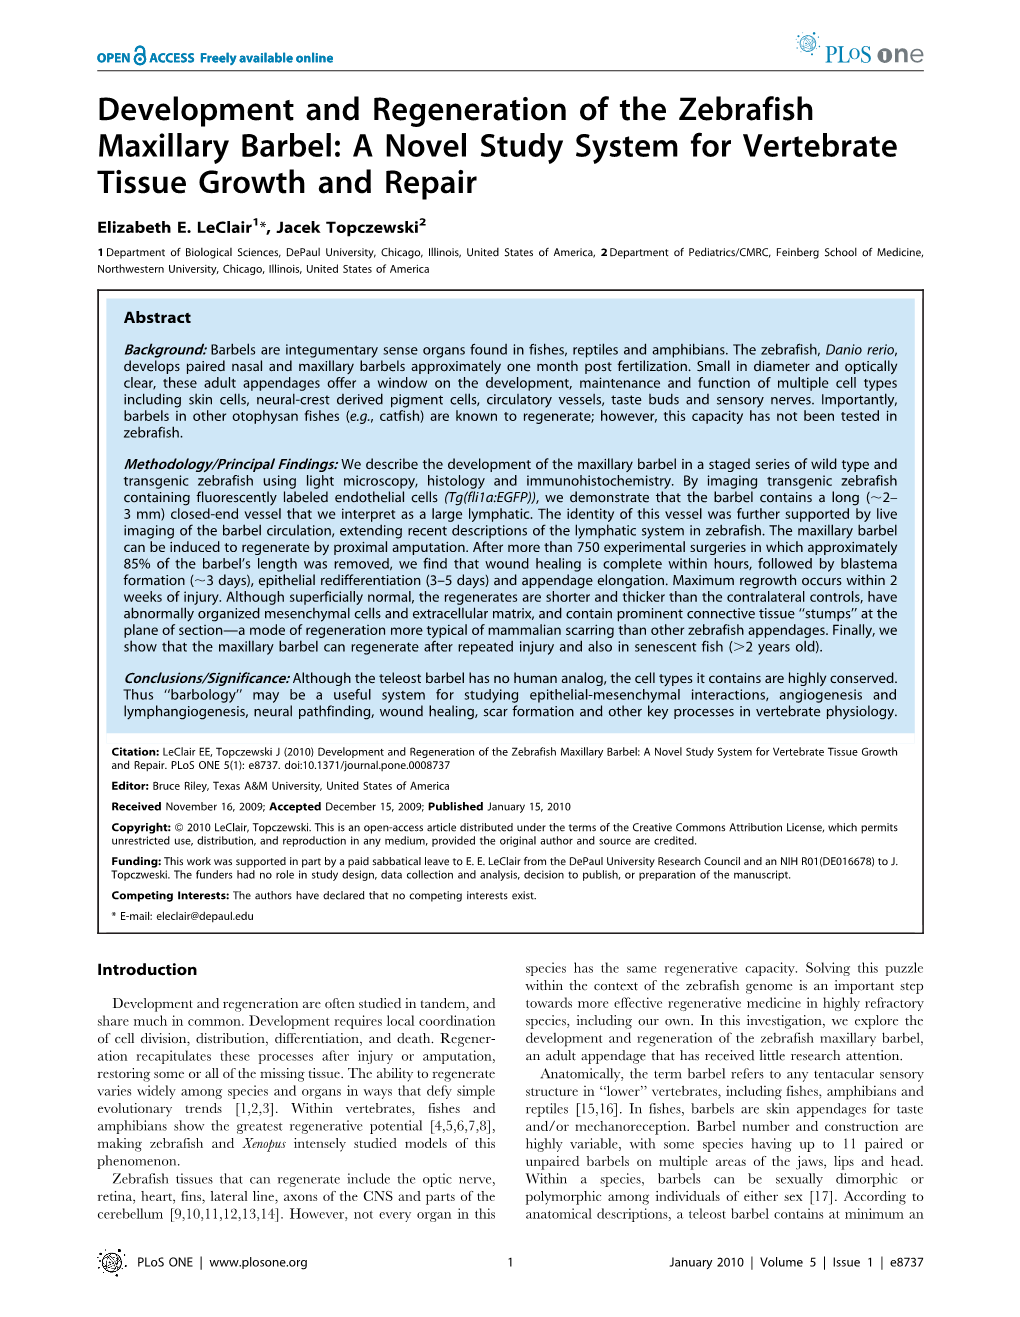 Development and Regeneration of the Zebrafish Maxillary Barbel: a Novel Study System for Vertebrate Tissue Growth and Repair